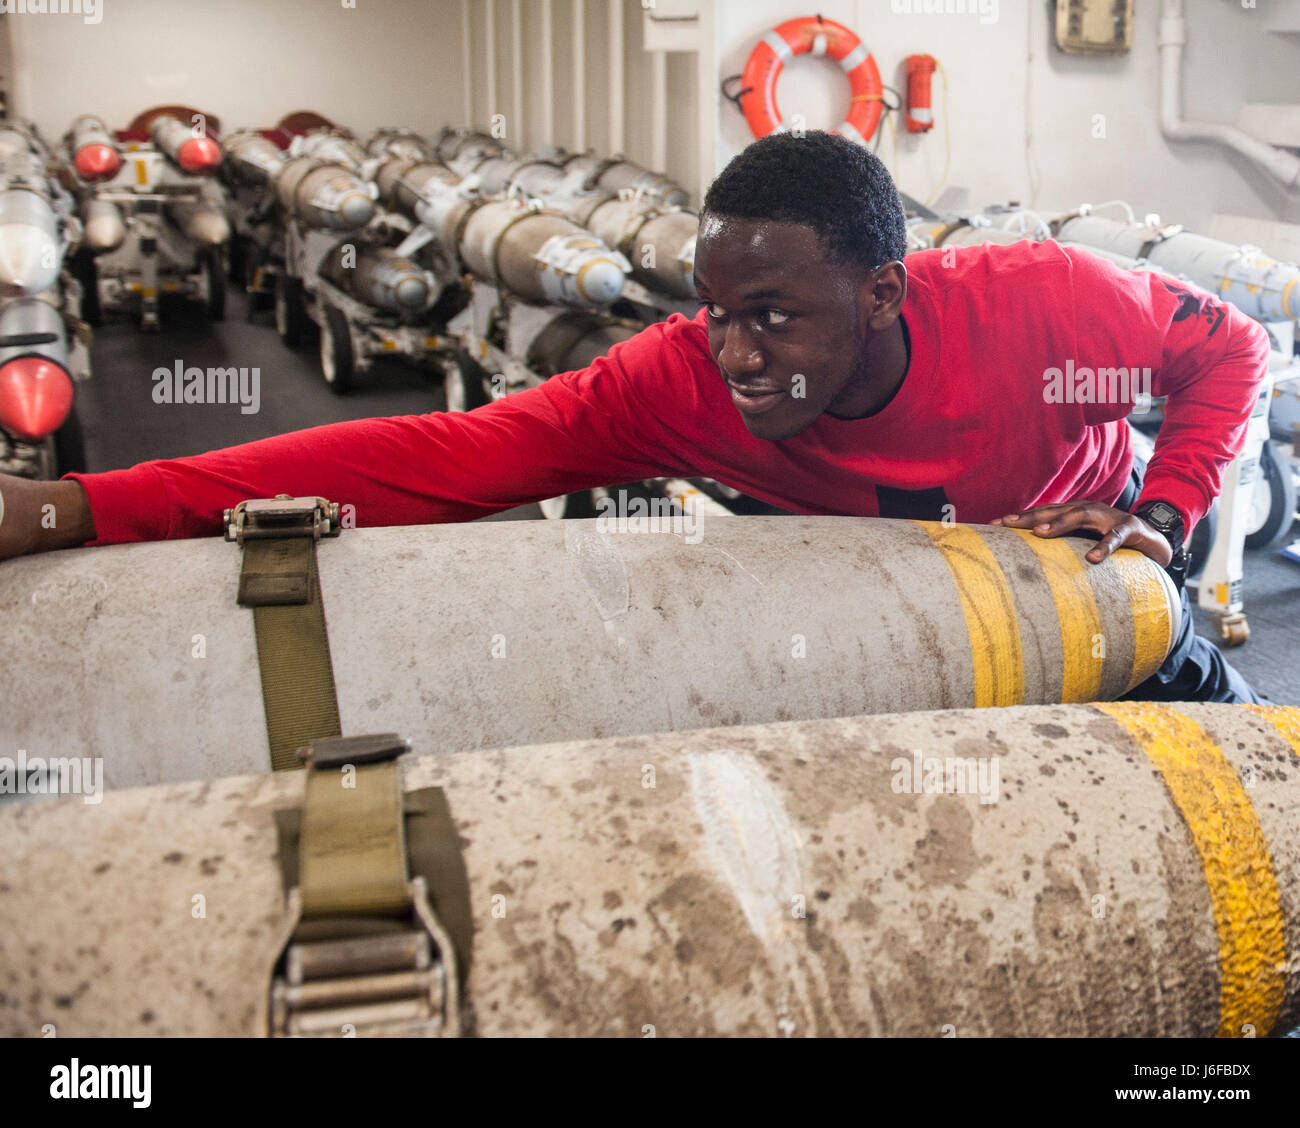 170509-N-RZ514-047  ARABIAN GULF (May 9, 2017) Aviation Ordnanceman 3rd Class Adarryl Chaney moves ordnance in the hangar bay of the aircraft carrier USS George H.W. Bush (CVN 77). The ship is deployed to the U.S. 5th Fleet area of operations in support of maritime security operations designed to reassure allies and partners, and preserve the freedom of navigation and the free flow of commerce in the region. (U.S. Navy photo by Mass Communication Specialist Seaman Jennifer M. Kirkman/Released) Stock Photo